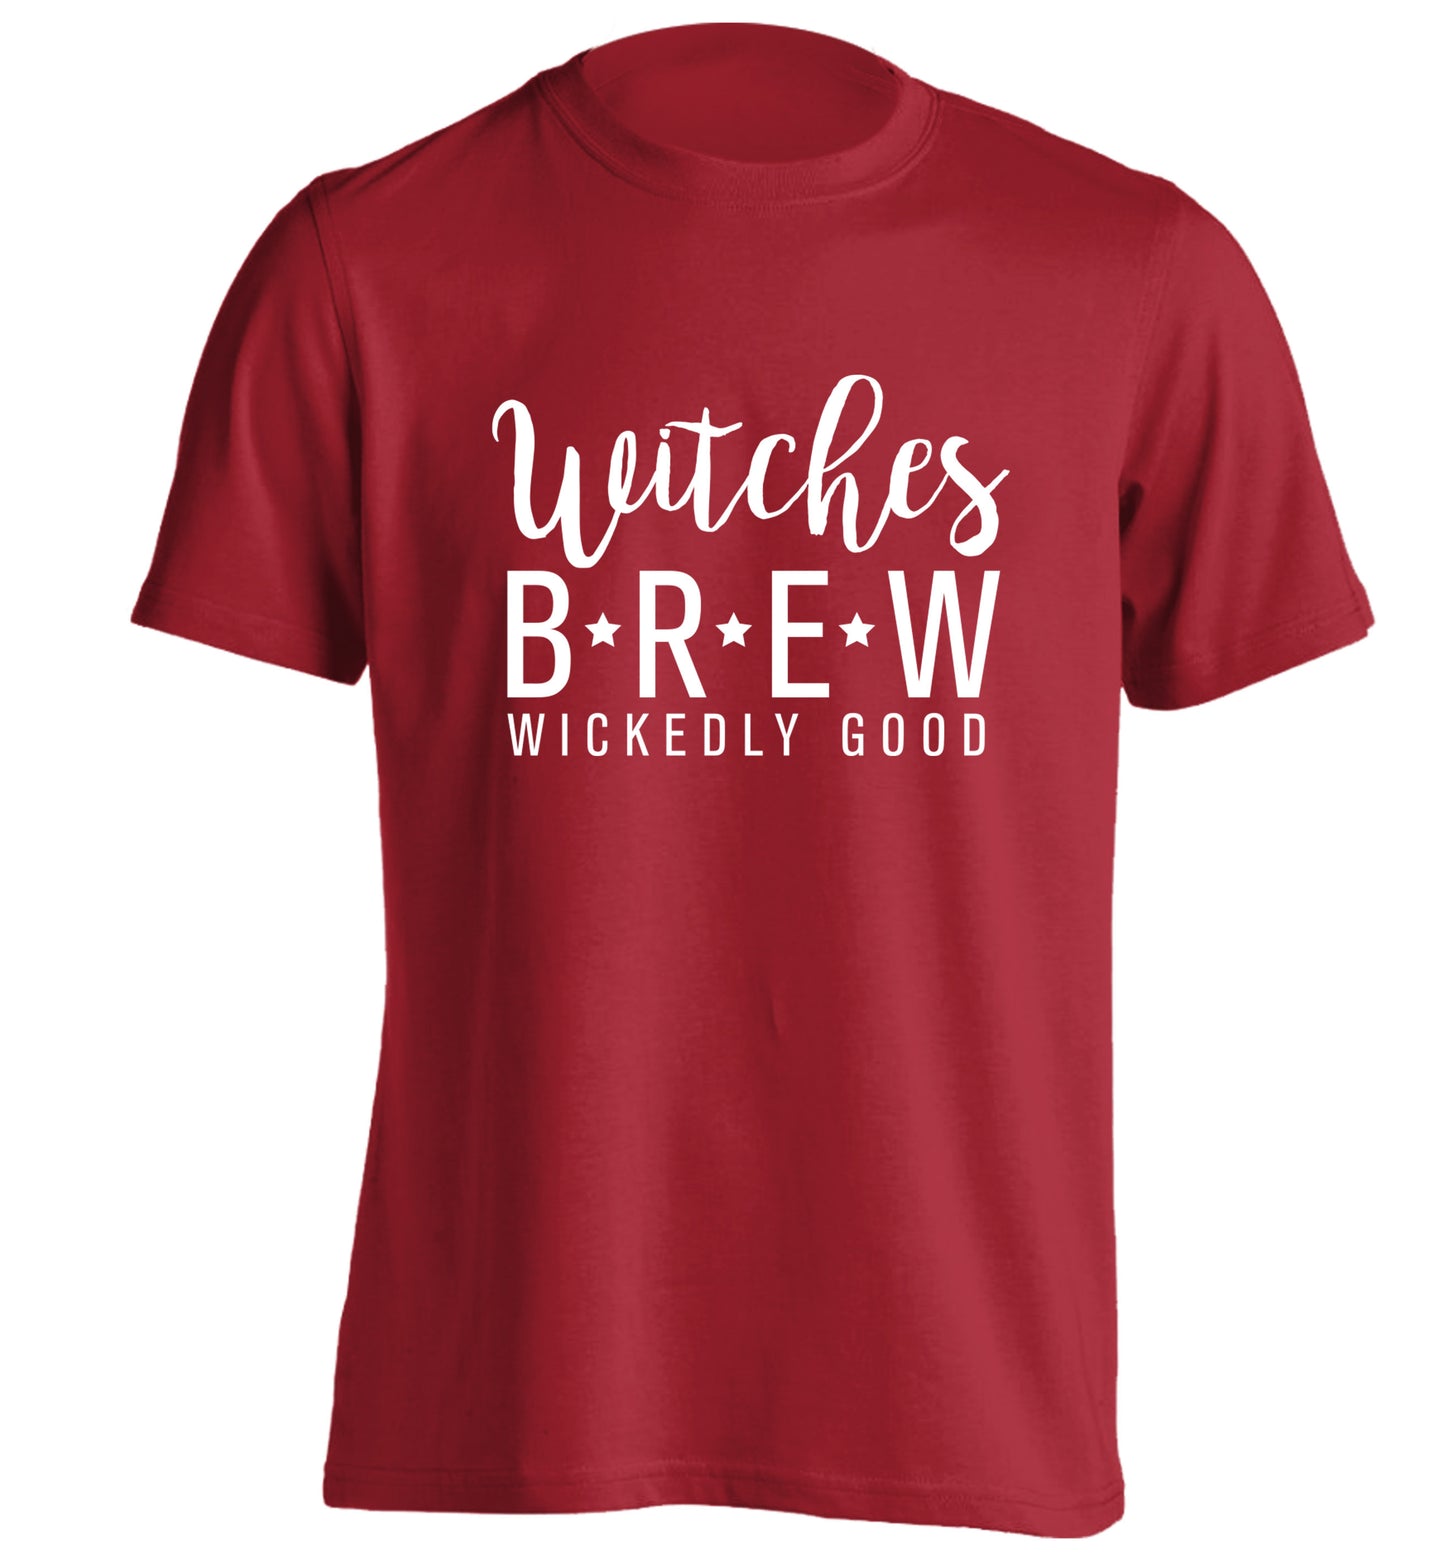 Witches Brew wickedly good adults unisex red Tshirt 2XL